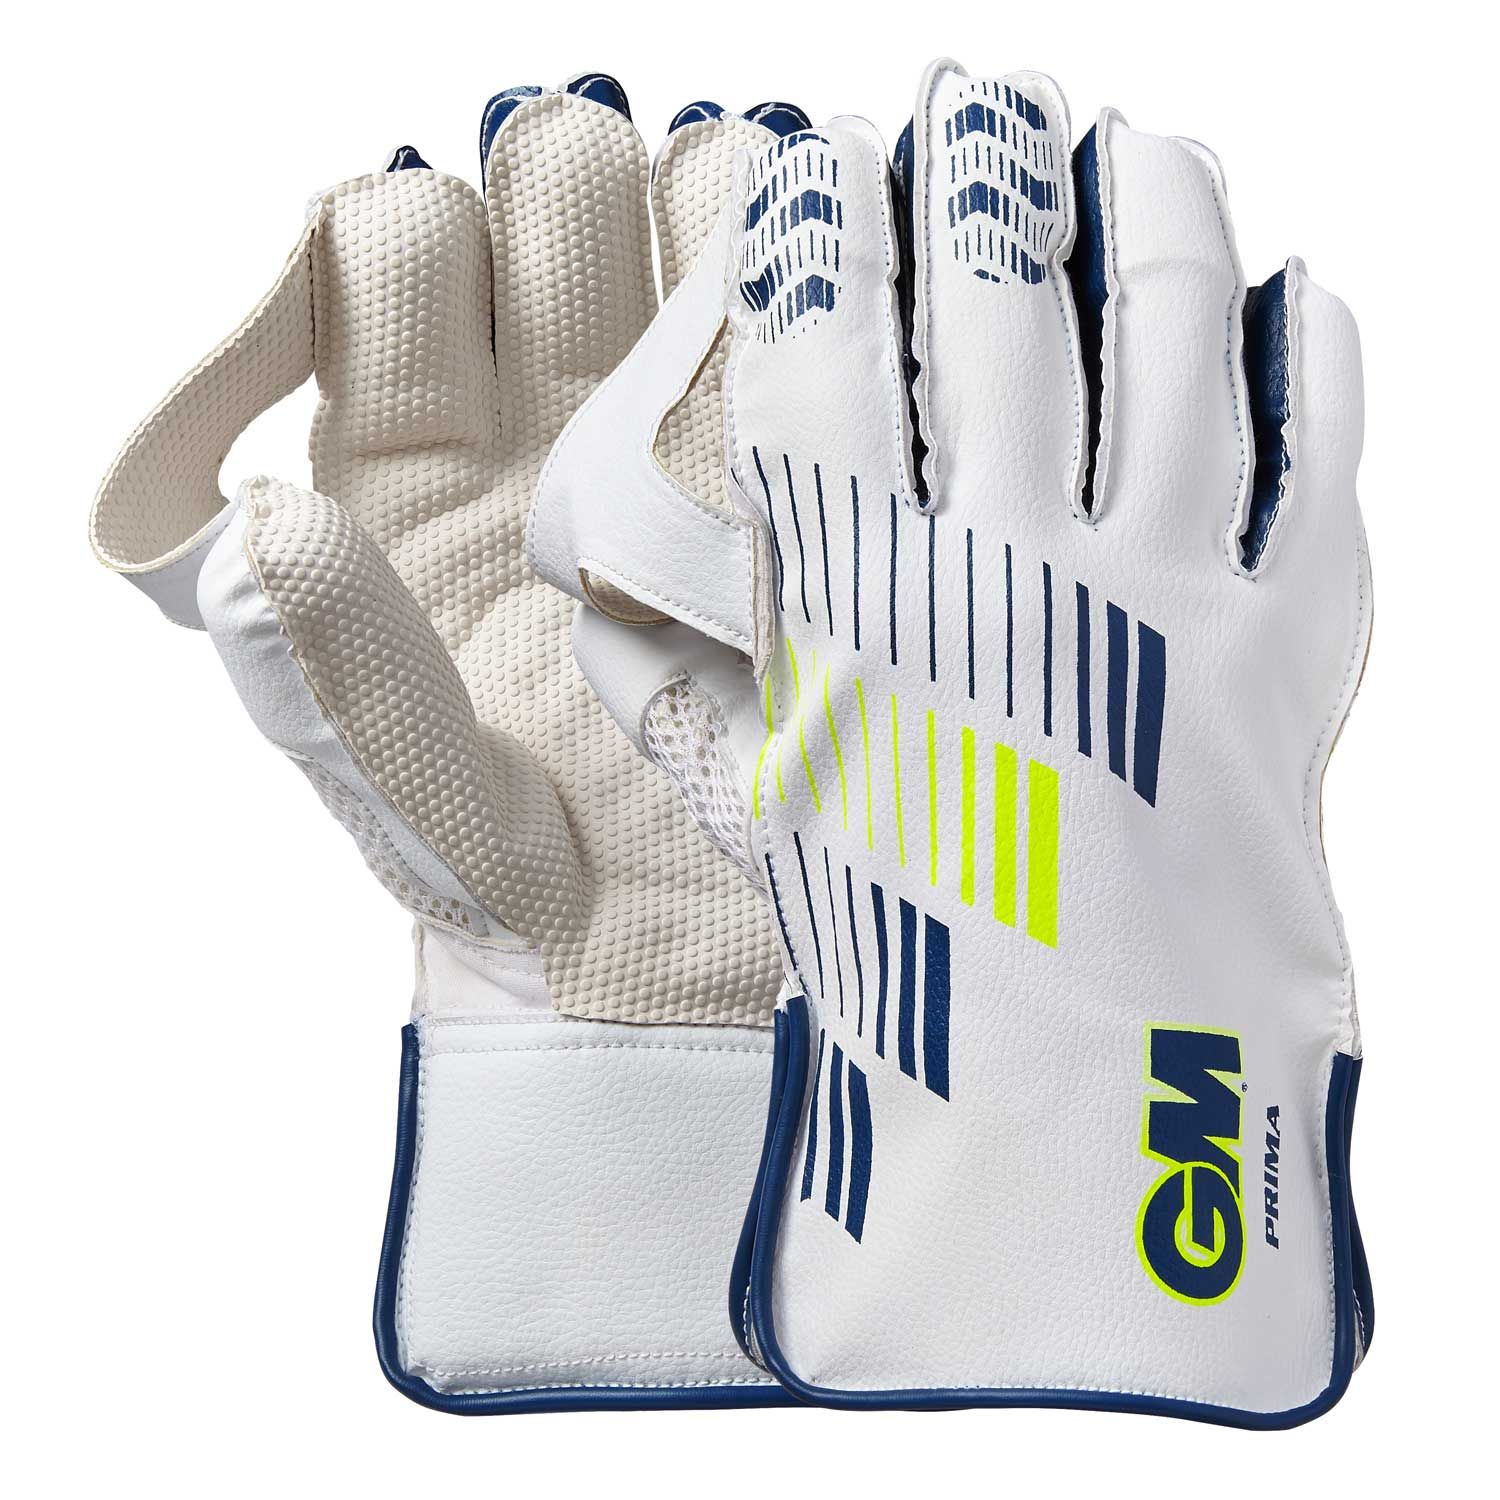 GM Wicket Keeping Gloves in Perth